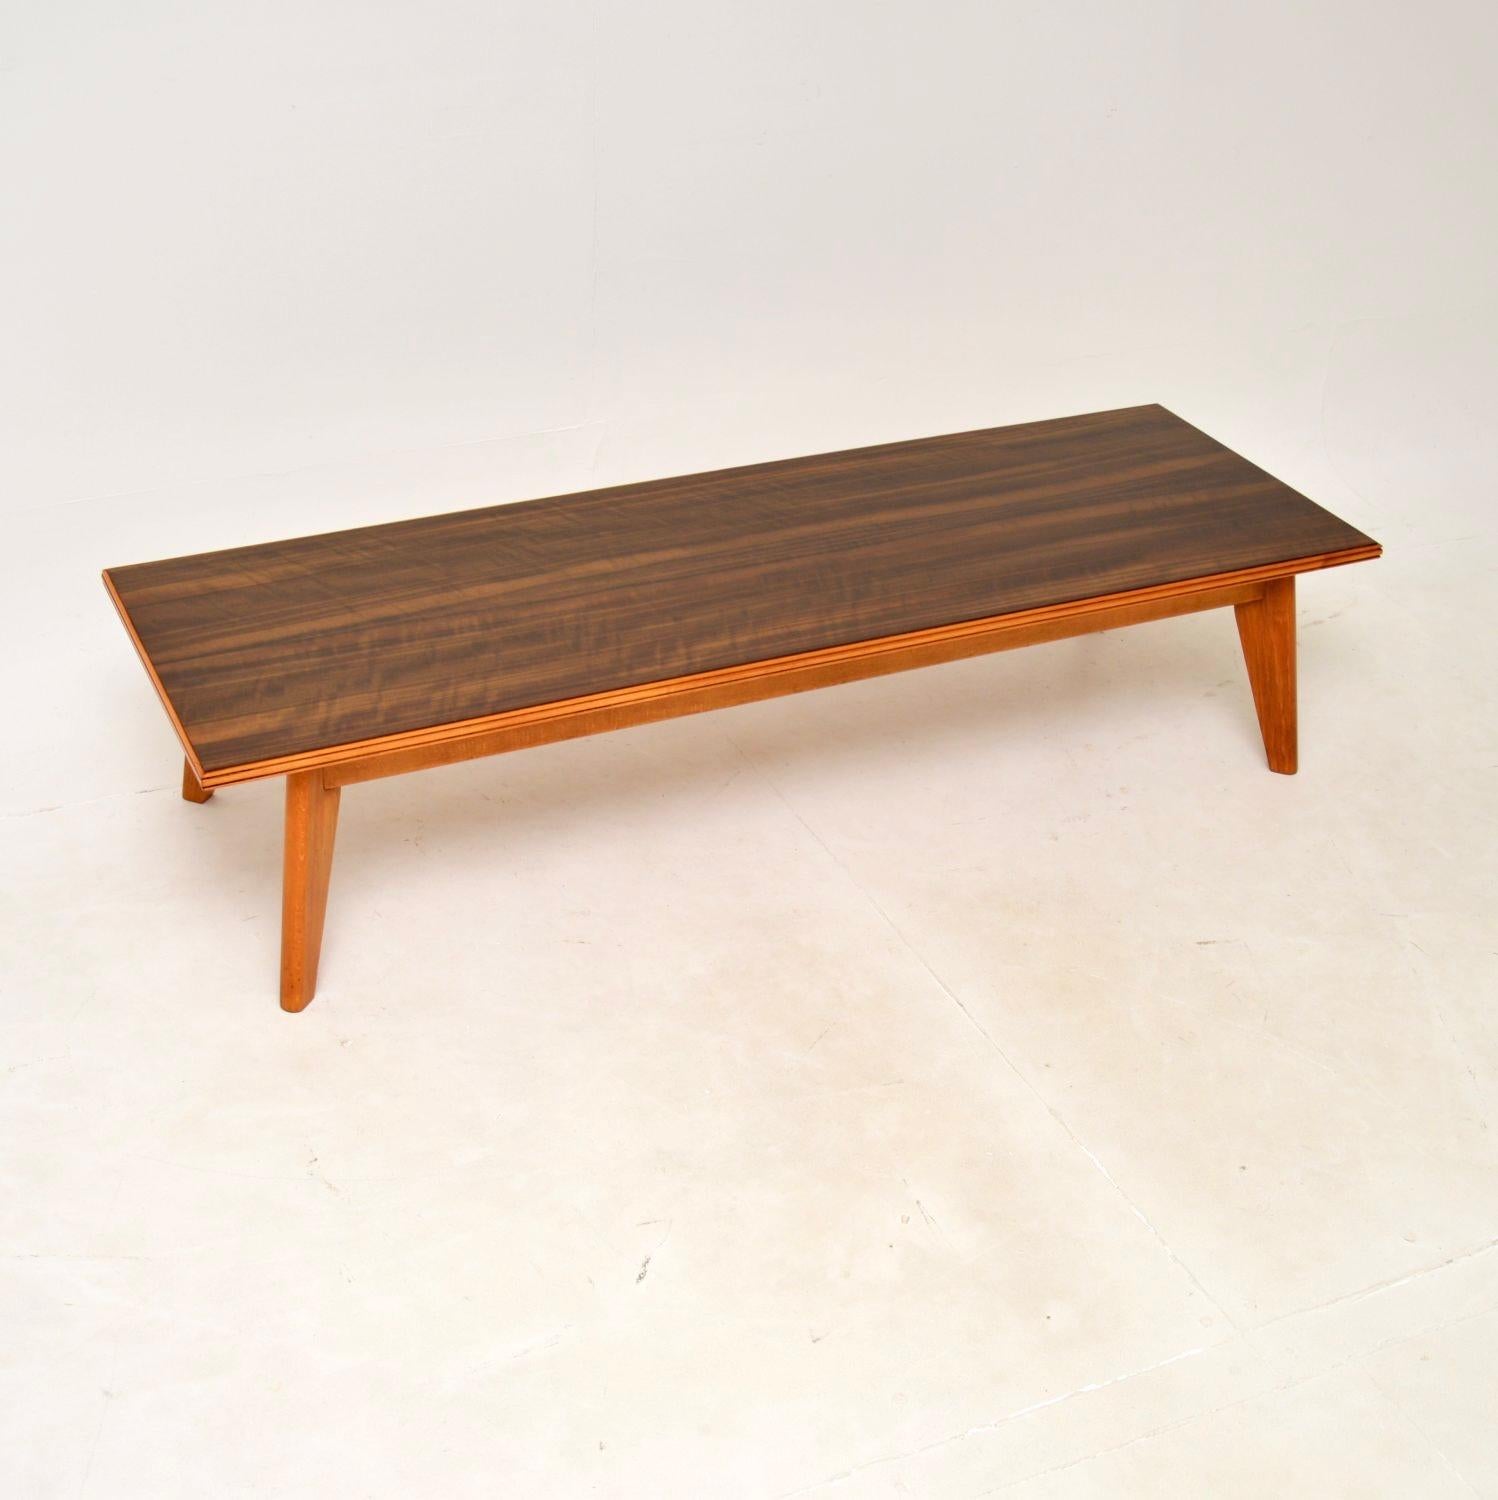 A sleek and stylish vintage walnut coffee table by Peter Hayward for Vanson. It was made in England, and dates from the 1950-60’s.

The quality is outstanding, this is low and long, sitting on beautifully tapered legs. The walnut top has a deep and